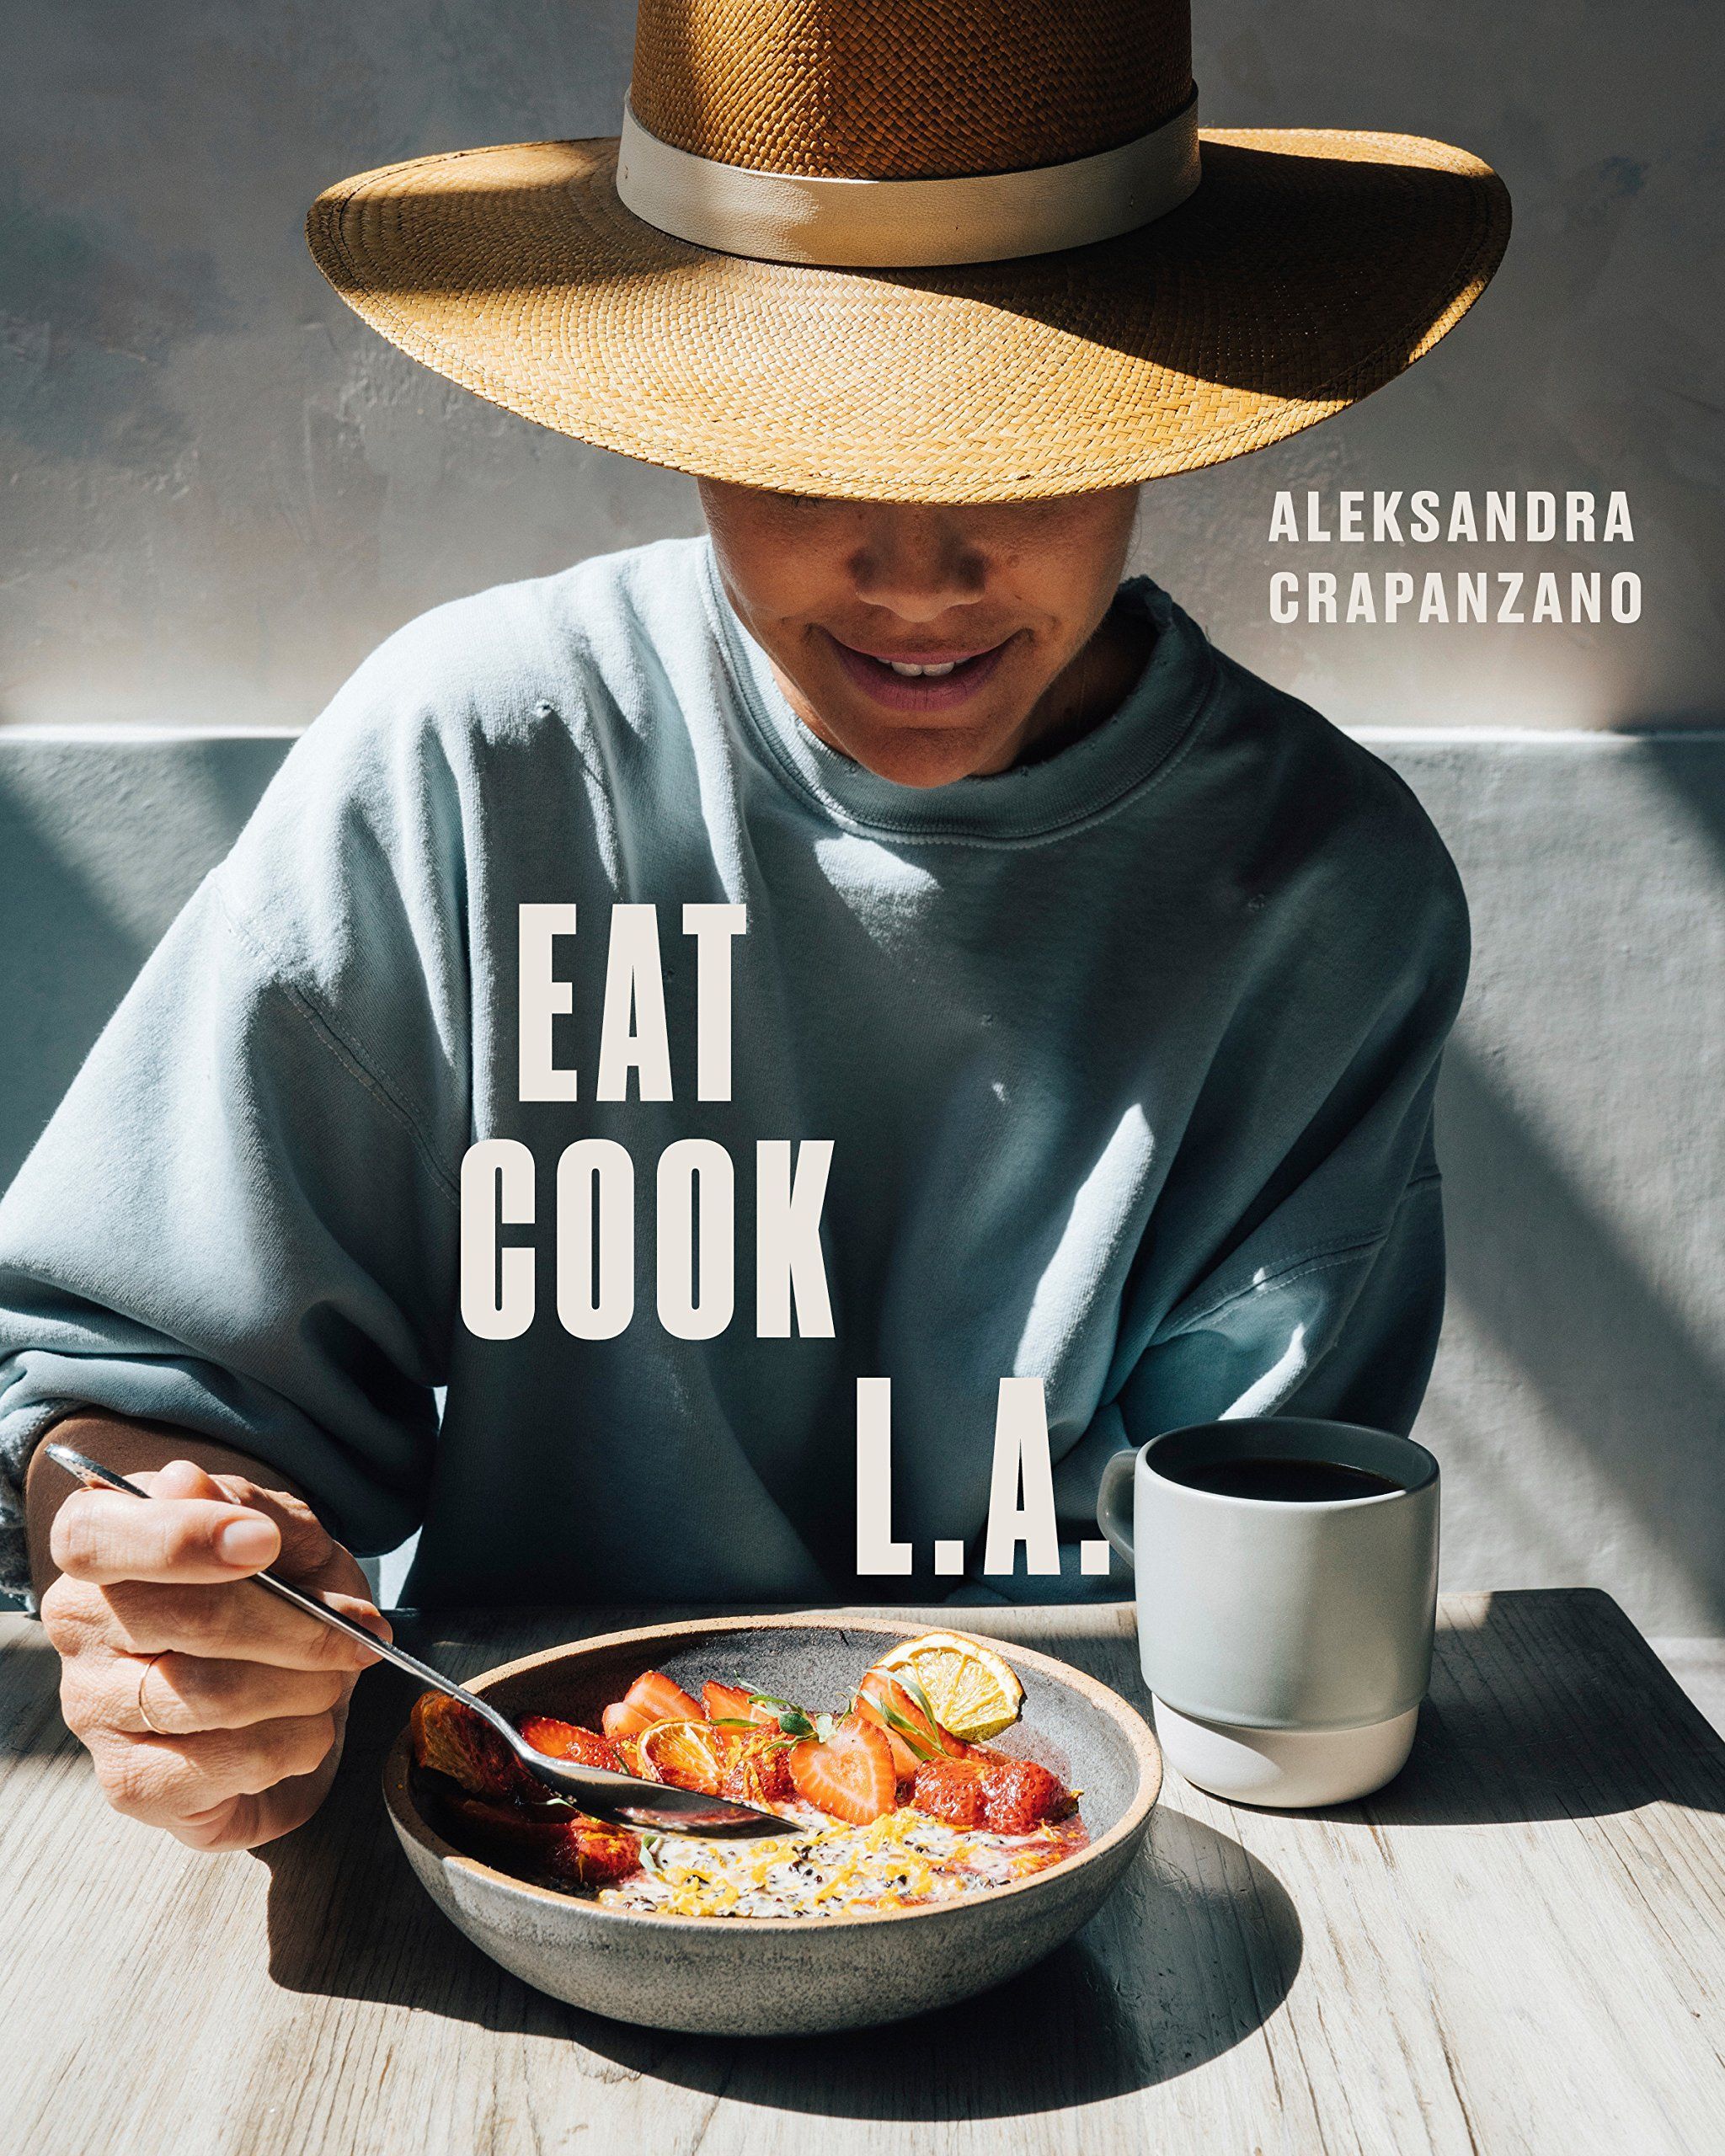 L.A. Cooks Itself: On Aleksandra Crapanzano’s “EAT. COOK. L.A.” and Elisa Callow’s “The Urban Forager”